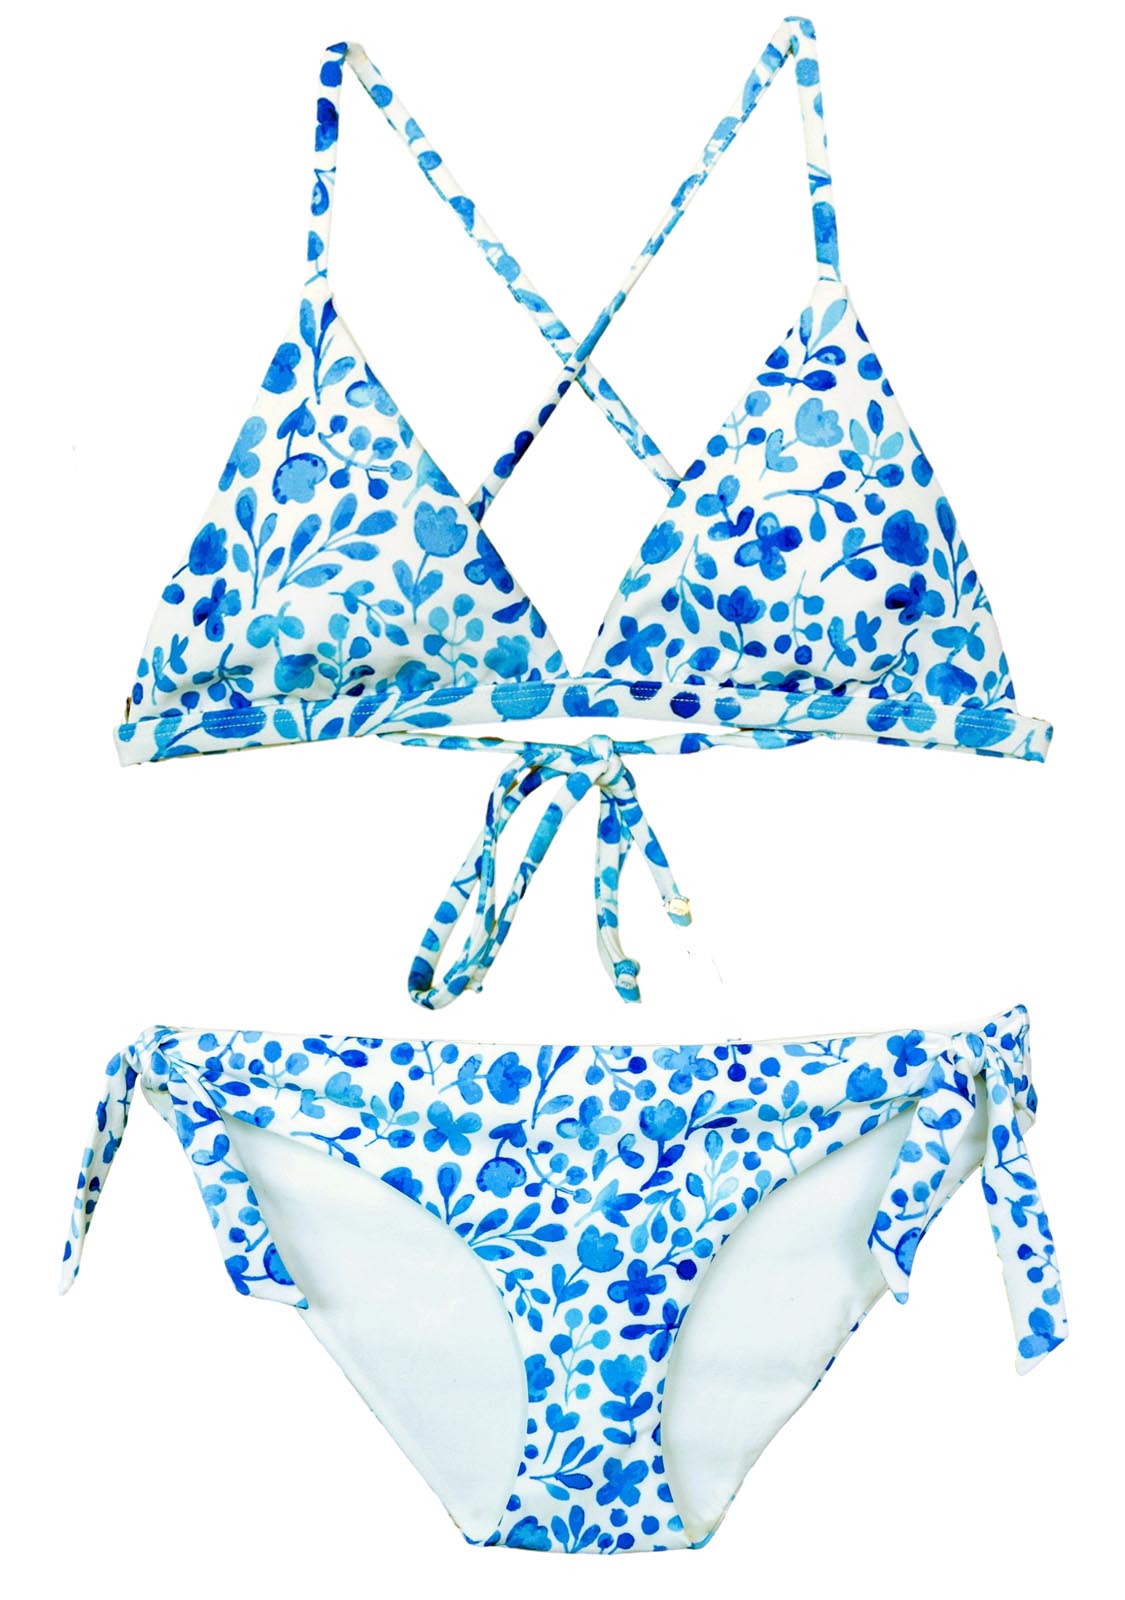 Two-Piece swimsuit for Tween, Teen and Junior Girls with blue and white floral detail